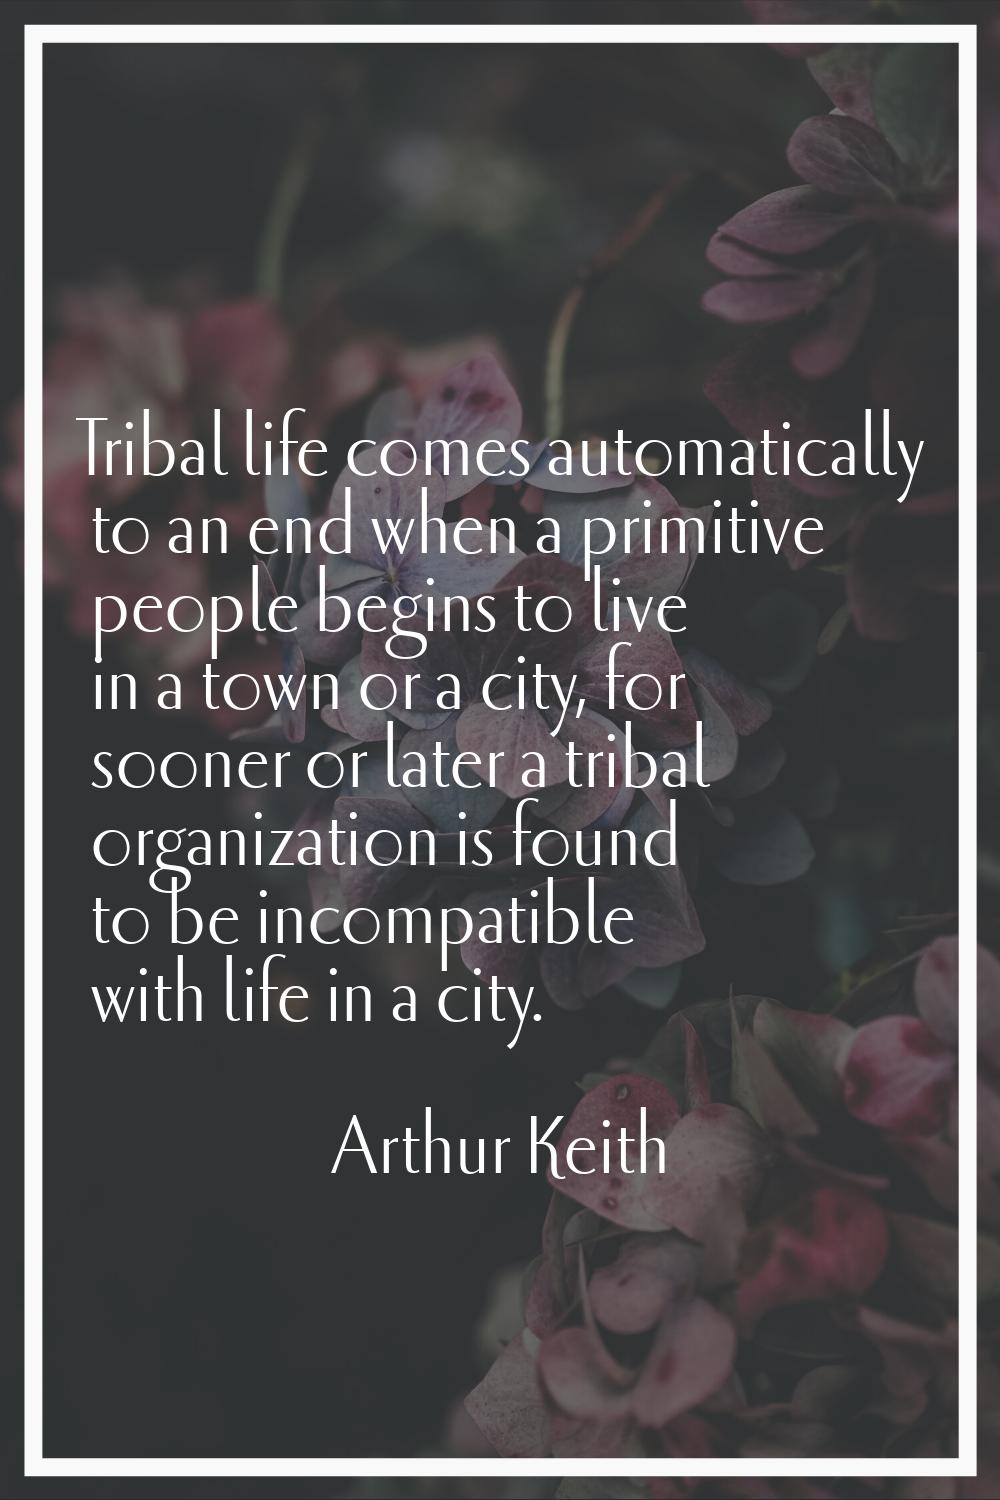 Tribal life comes automatically to an end when a primitive people begins to live in a town or a cit